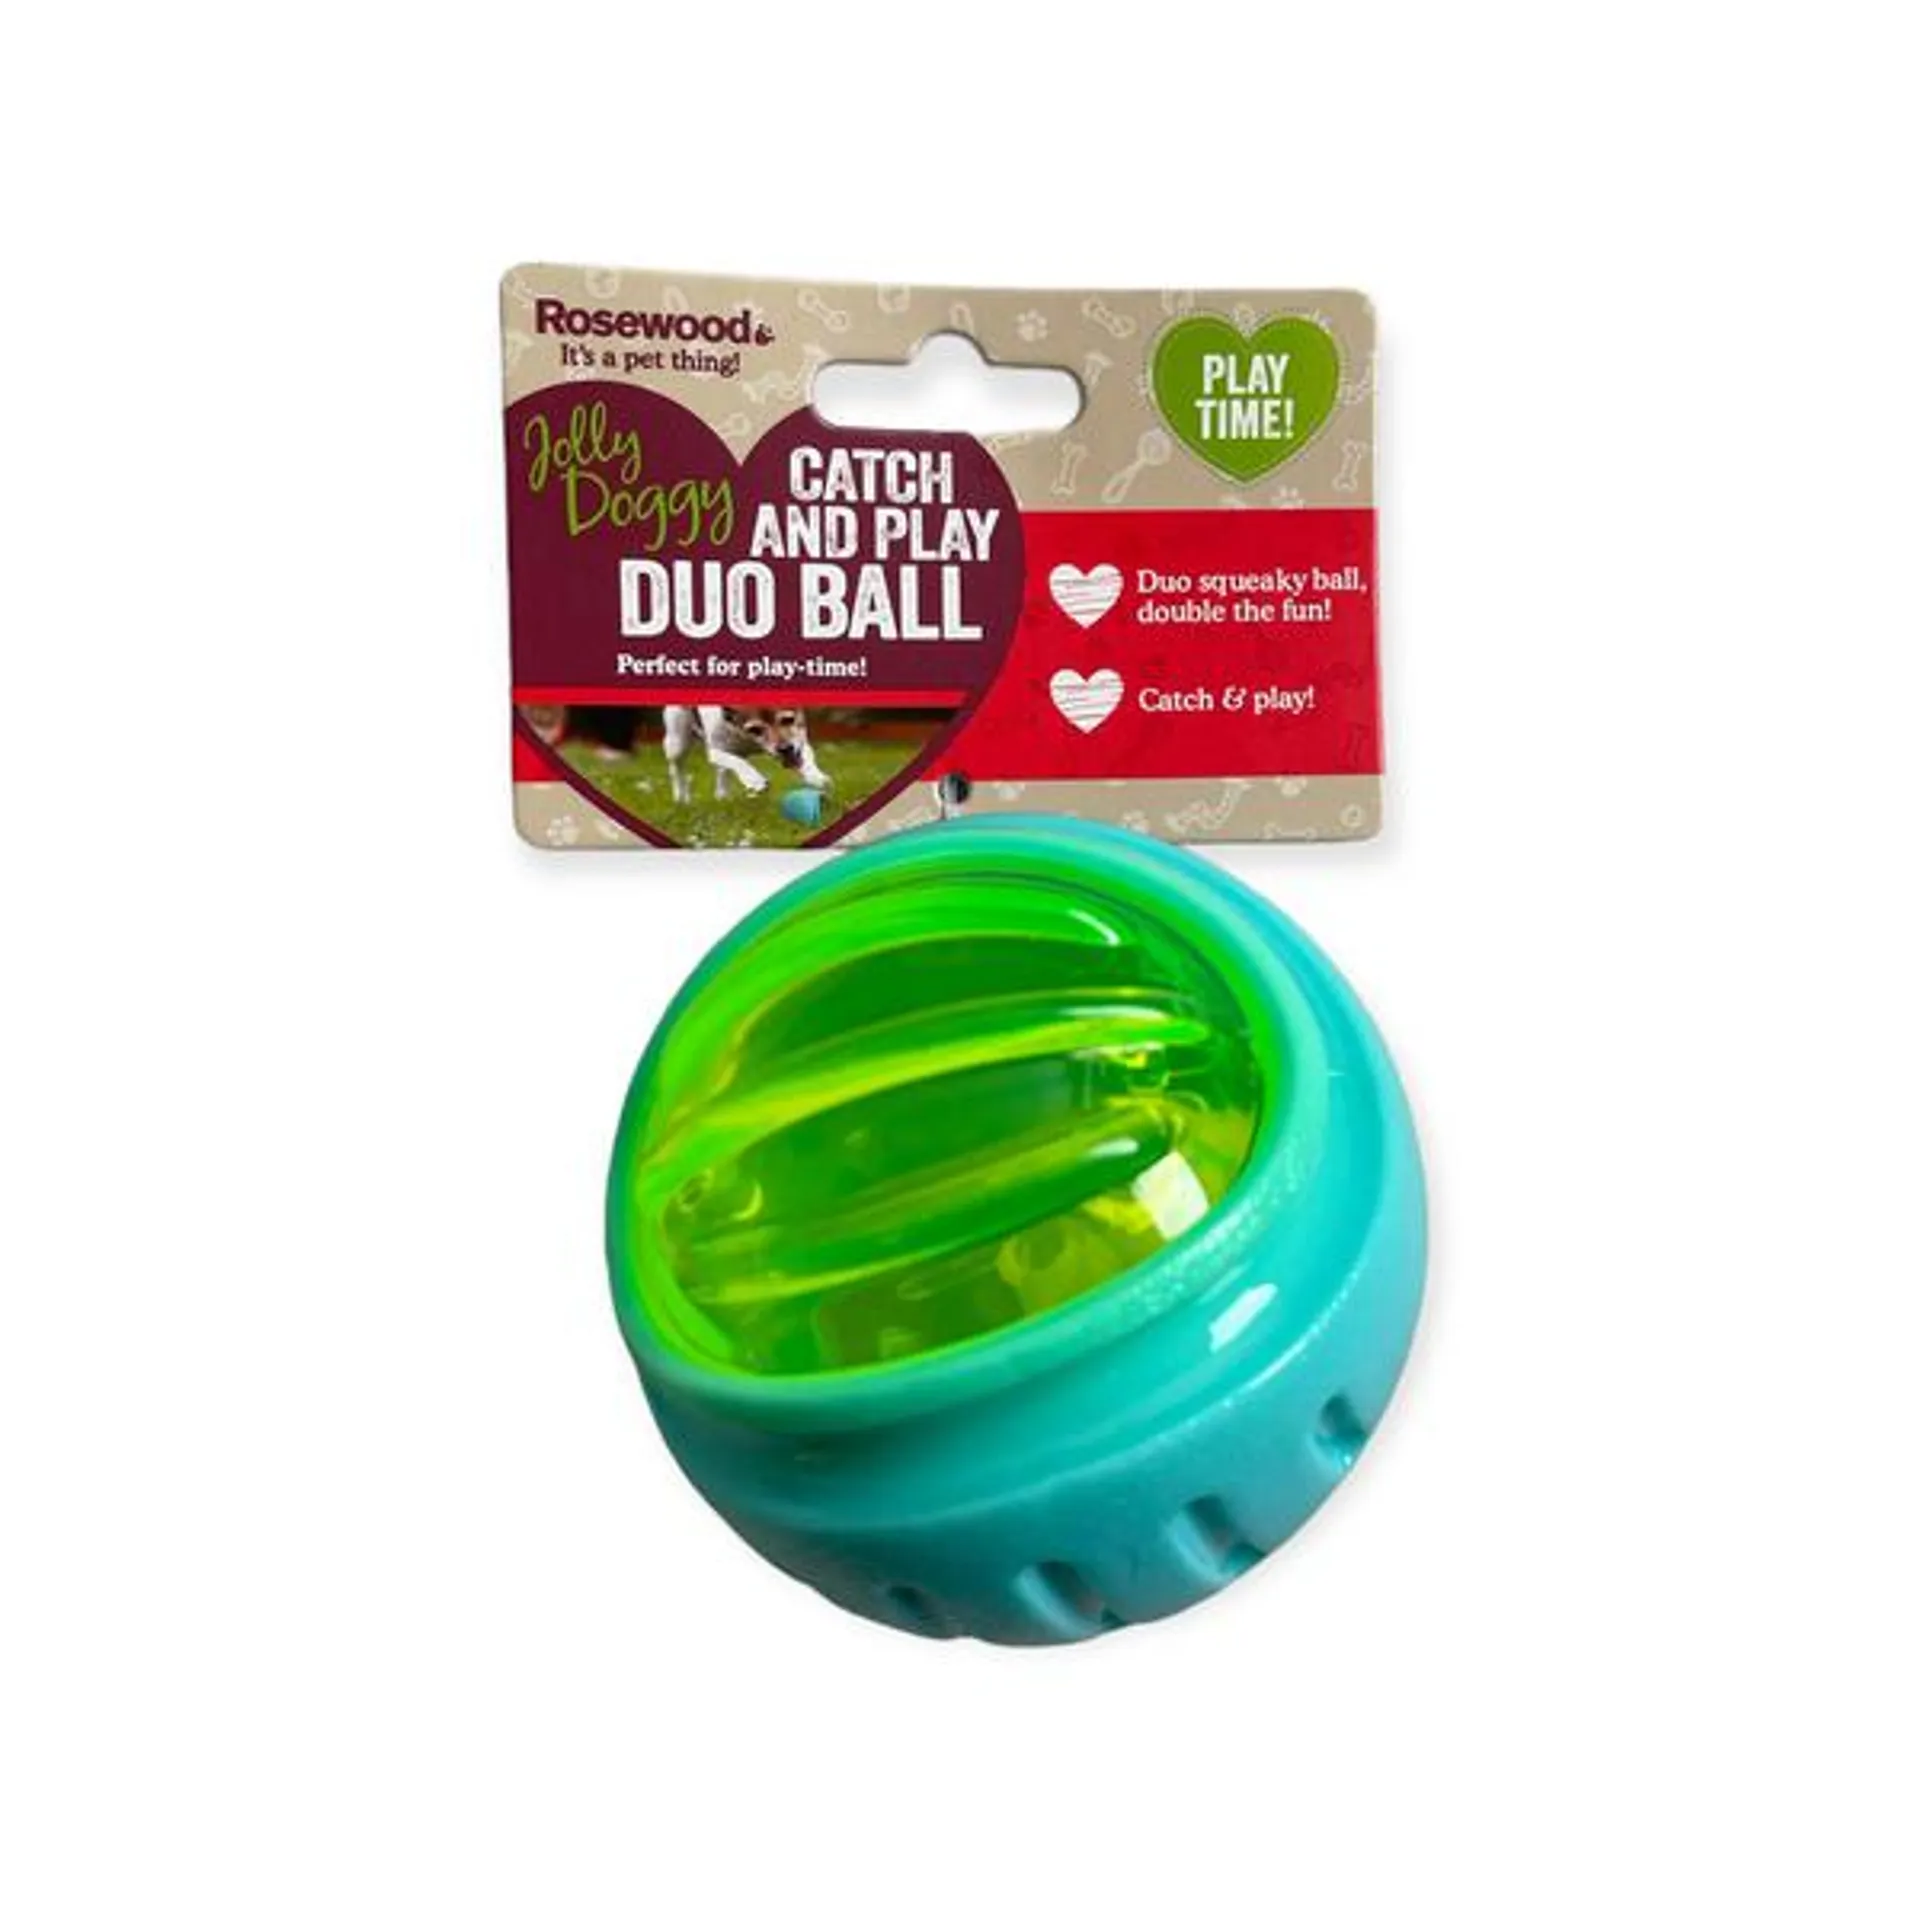 Jolly Doggy Catch And Play Duo Ball